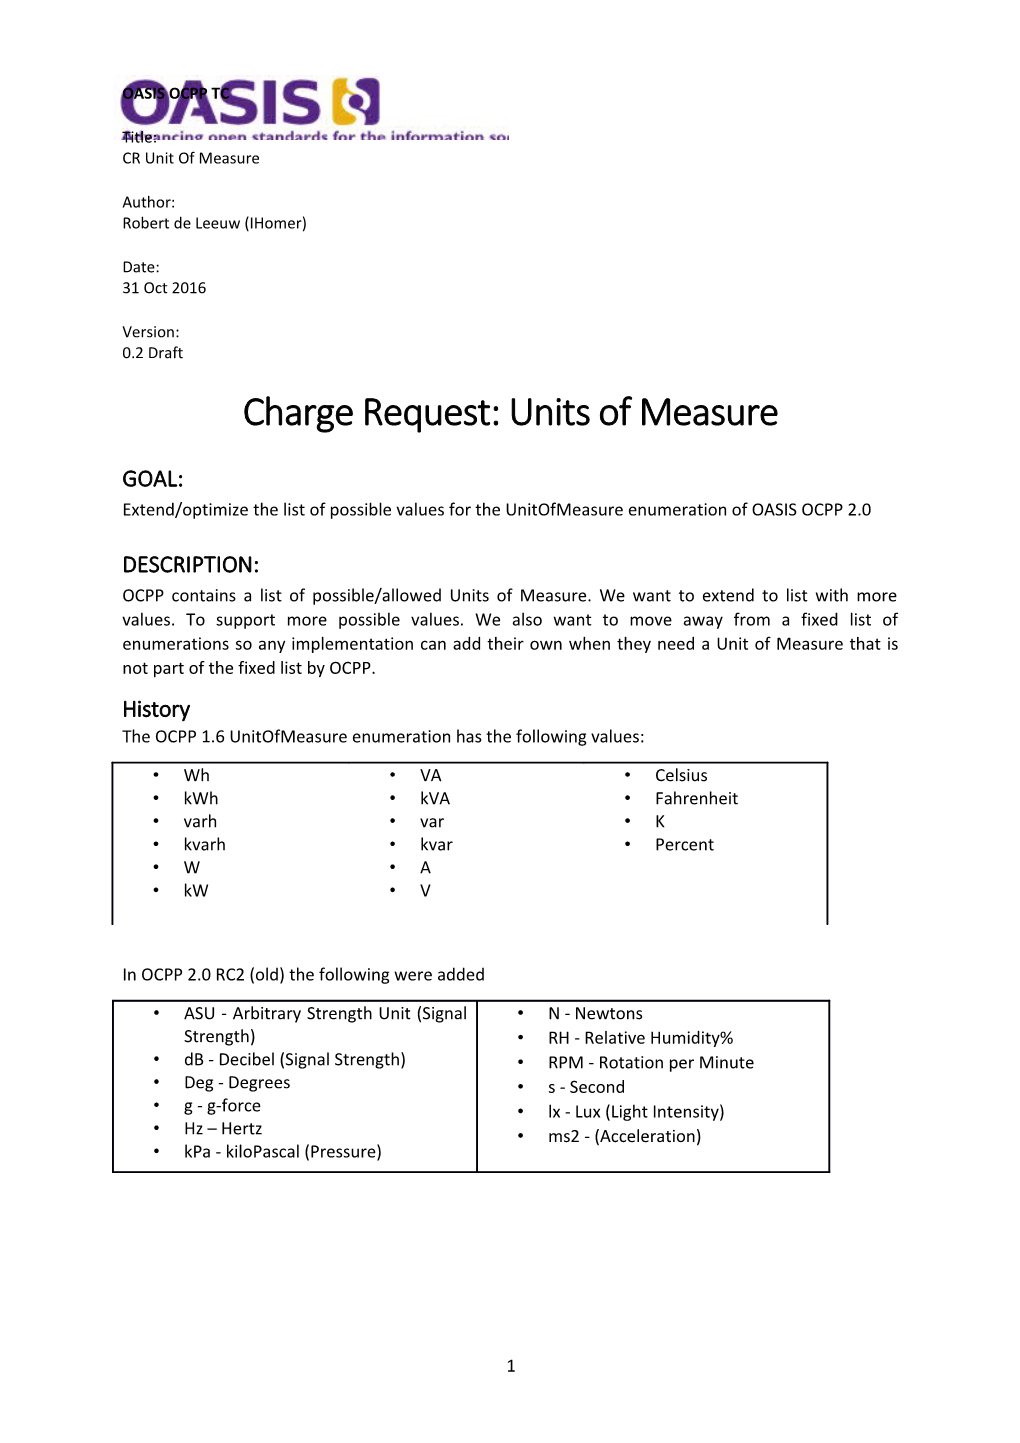 Charge Request: Units of Measure